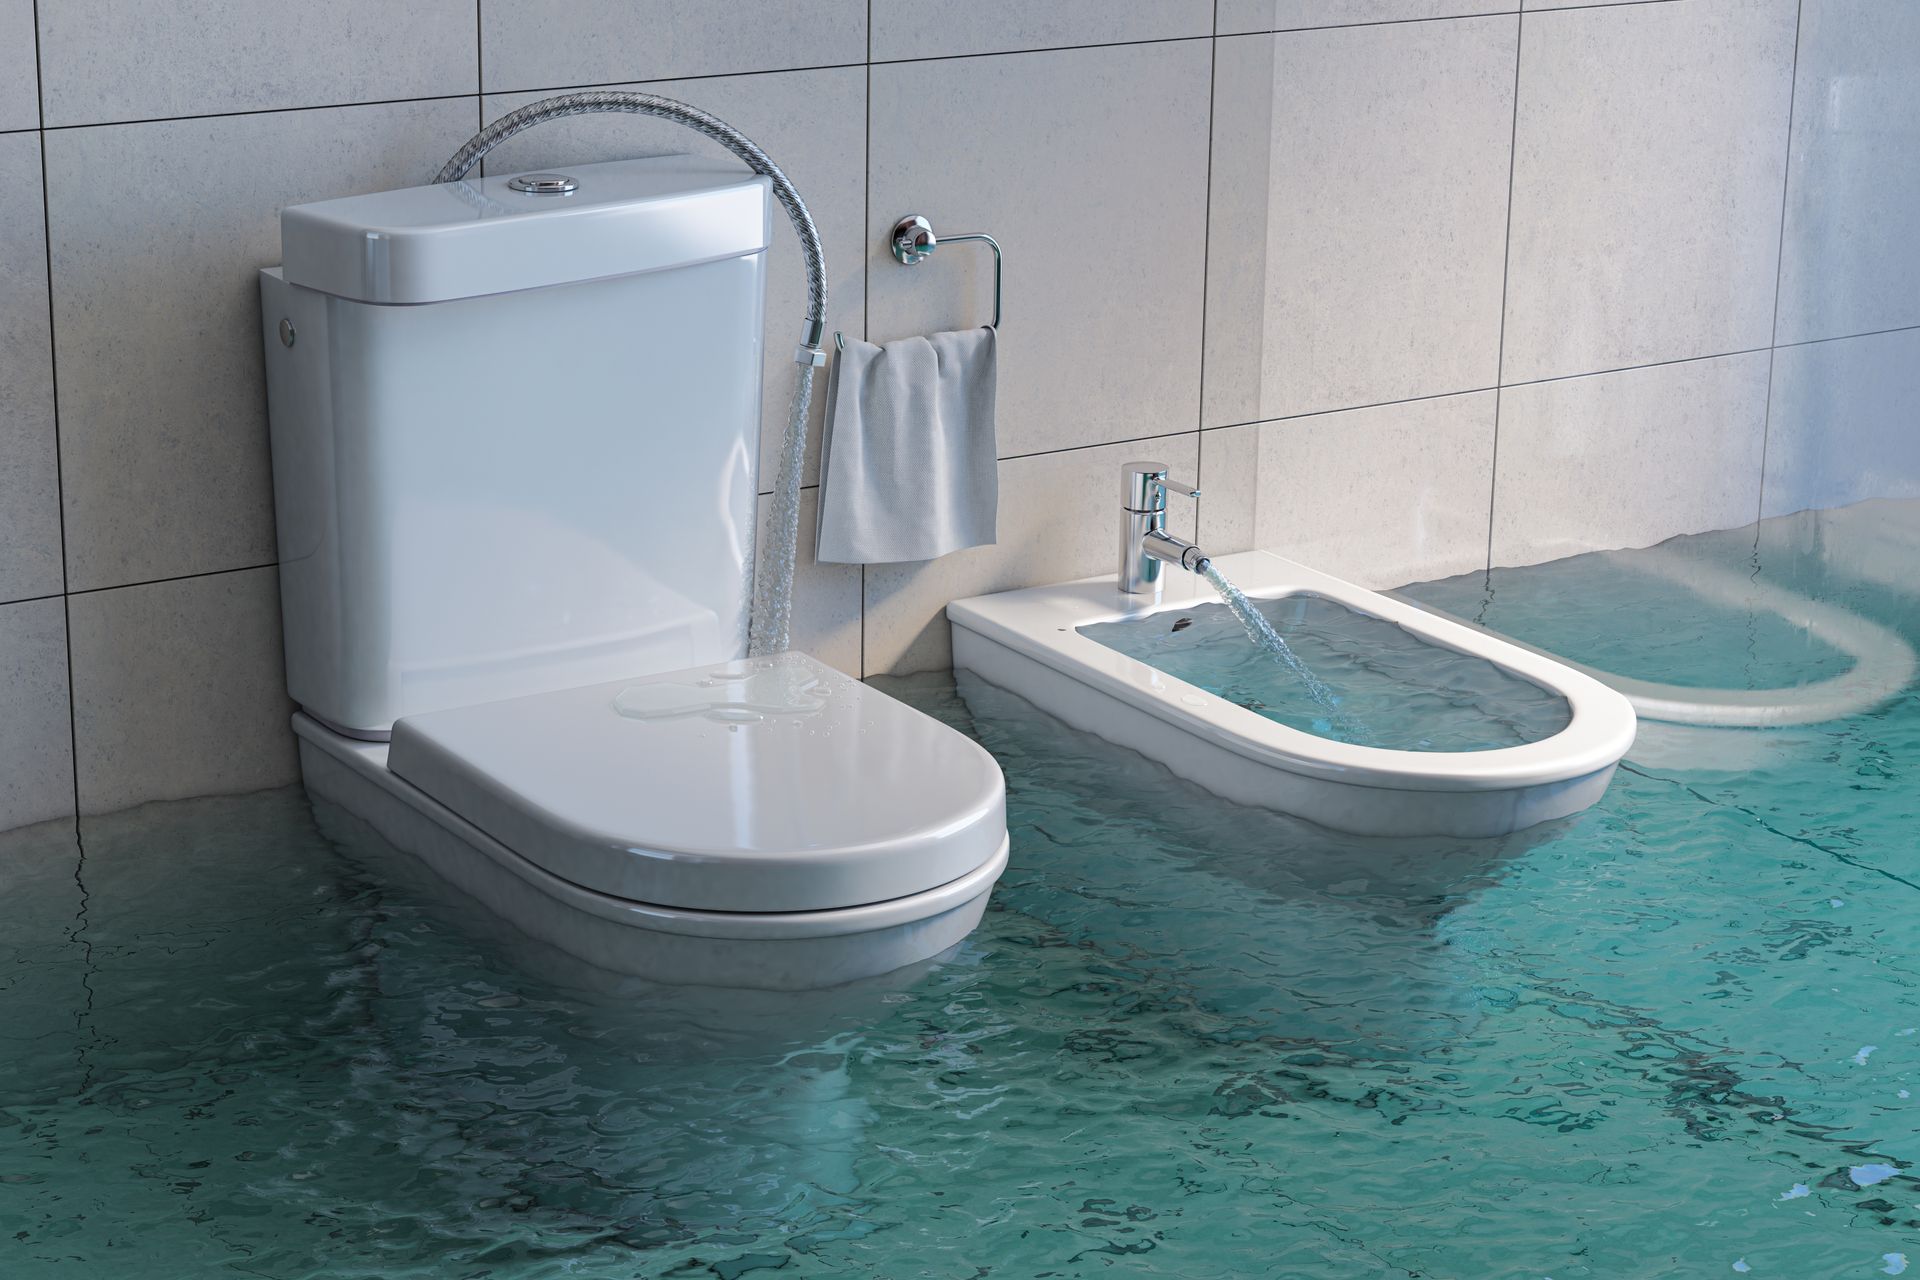 A bathroom with a toilet and bidet filled with water.